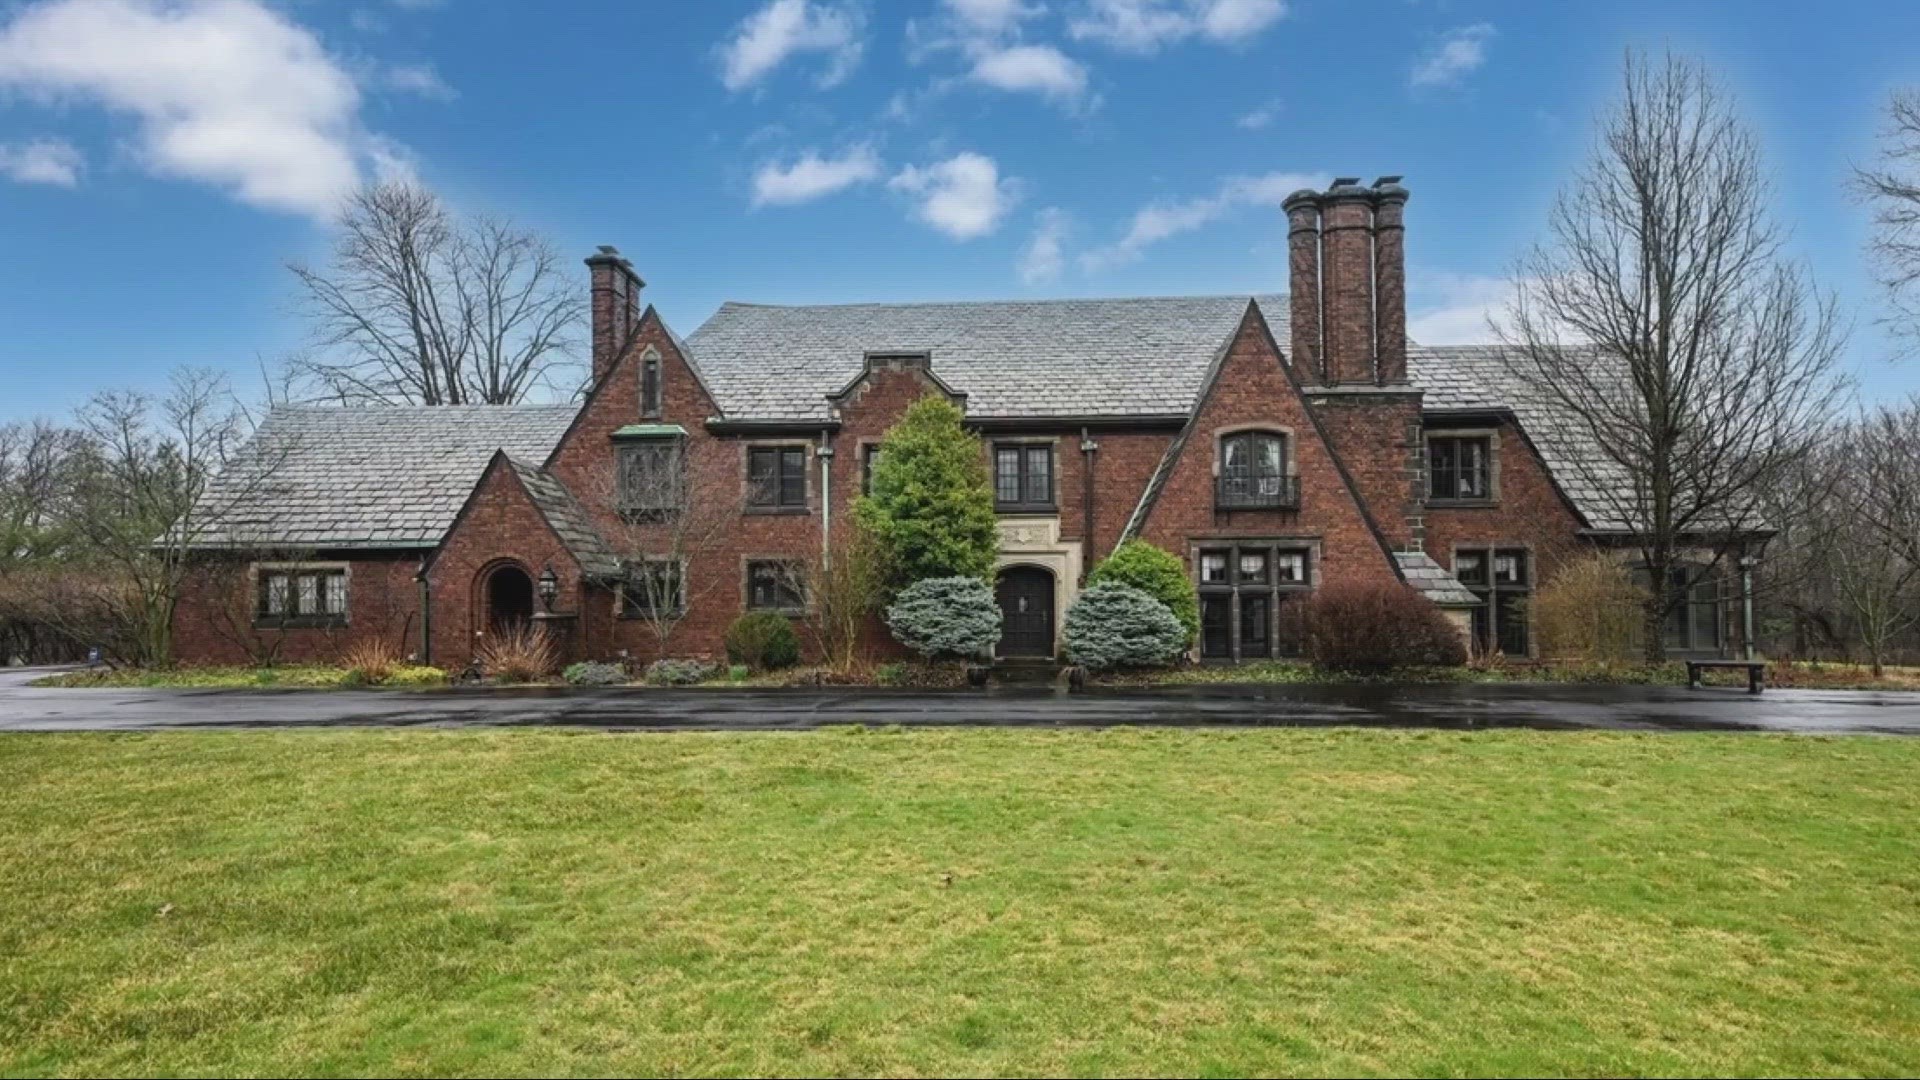 'It later became known as the Jackson House because it was once inhabited by Lee Jackson, former President of Firestone Tire & Rubber Company,' the listing says.